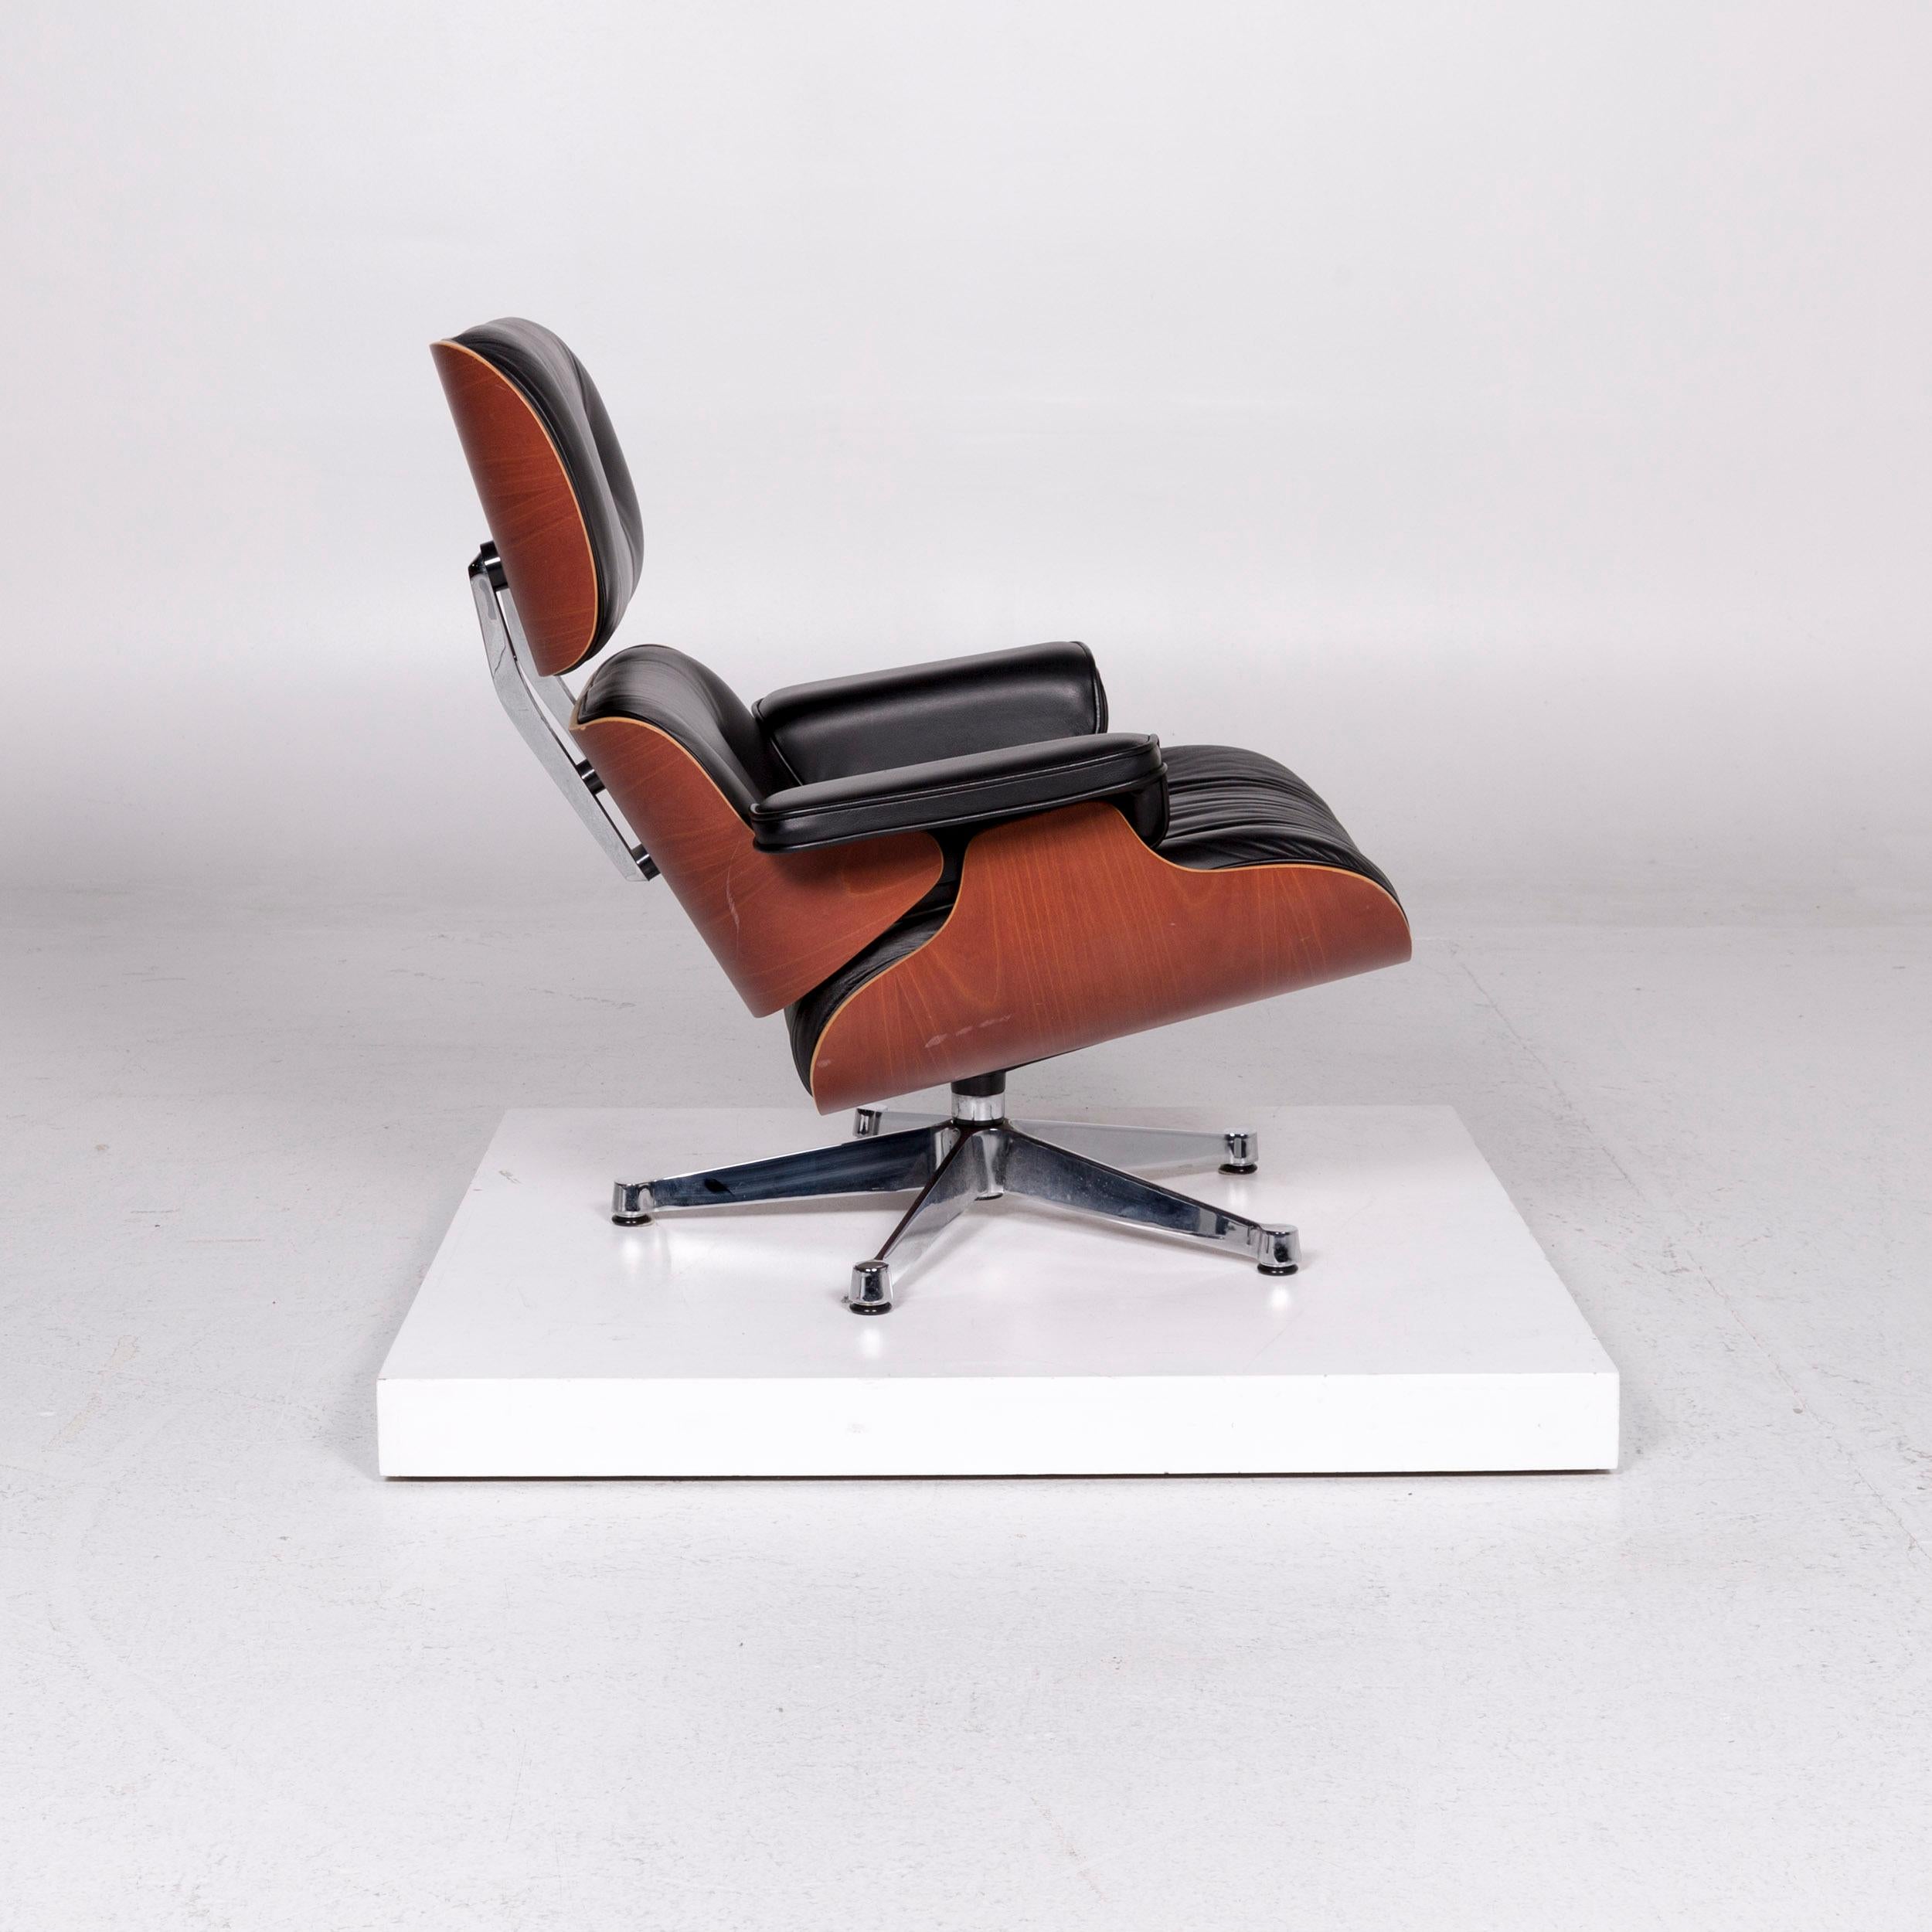 Vitra Eames Lounge Chair Leather Armchair Black Incl. Stool Cherrywood Club 4